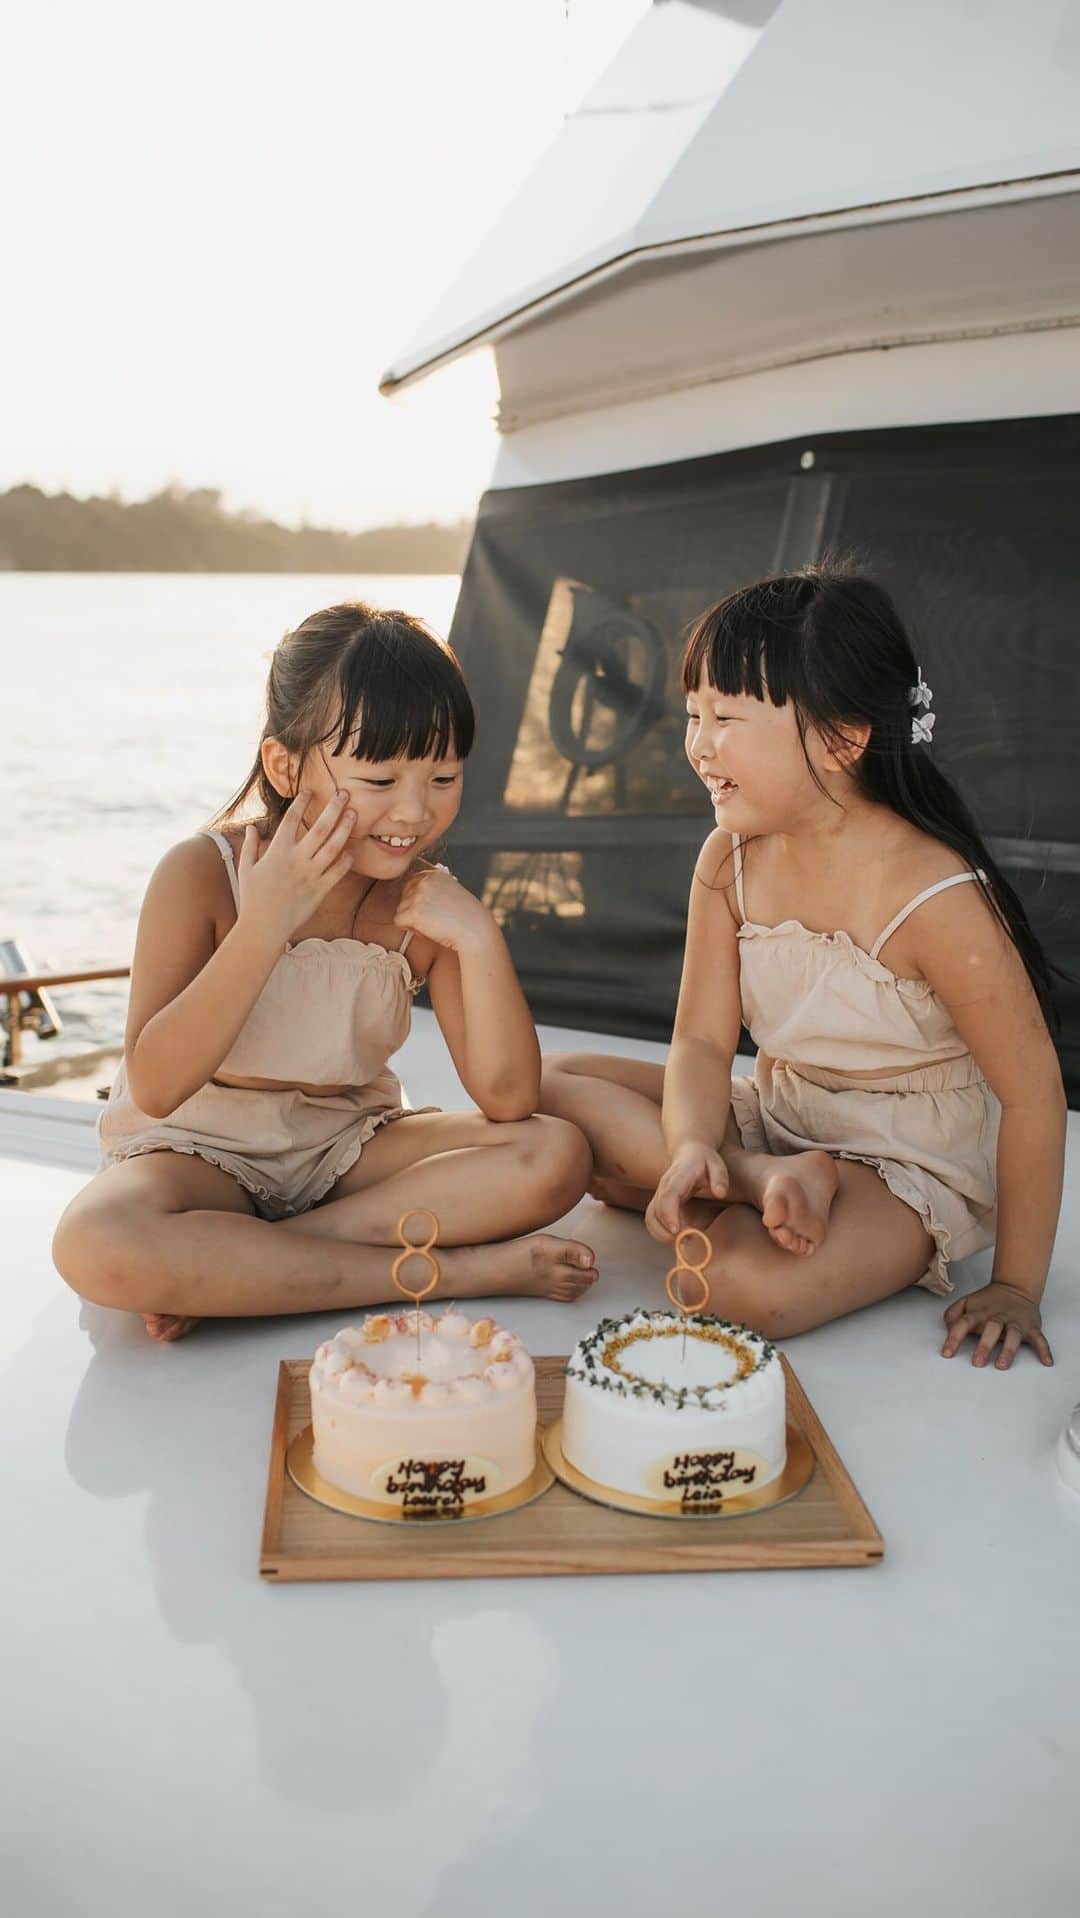 MOMOツインズのインスタグラム：「One day you’re 7, the next you’re 8. Growing so fast it’s almost difficult to keep up. Happy Birthday to our rays of sunshine, Leia & Lauren!  We spent their special day out at sea, they’ve been meaning to go on a fishing trip for a long while. So glad we made it happen (at the very last minute) and that we didn’t go home empty-handed. These are the smiles we live for ❤️」